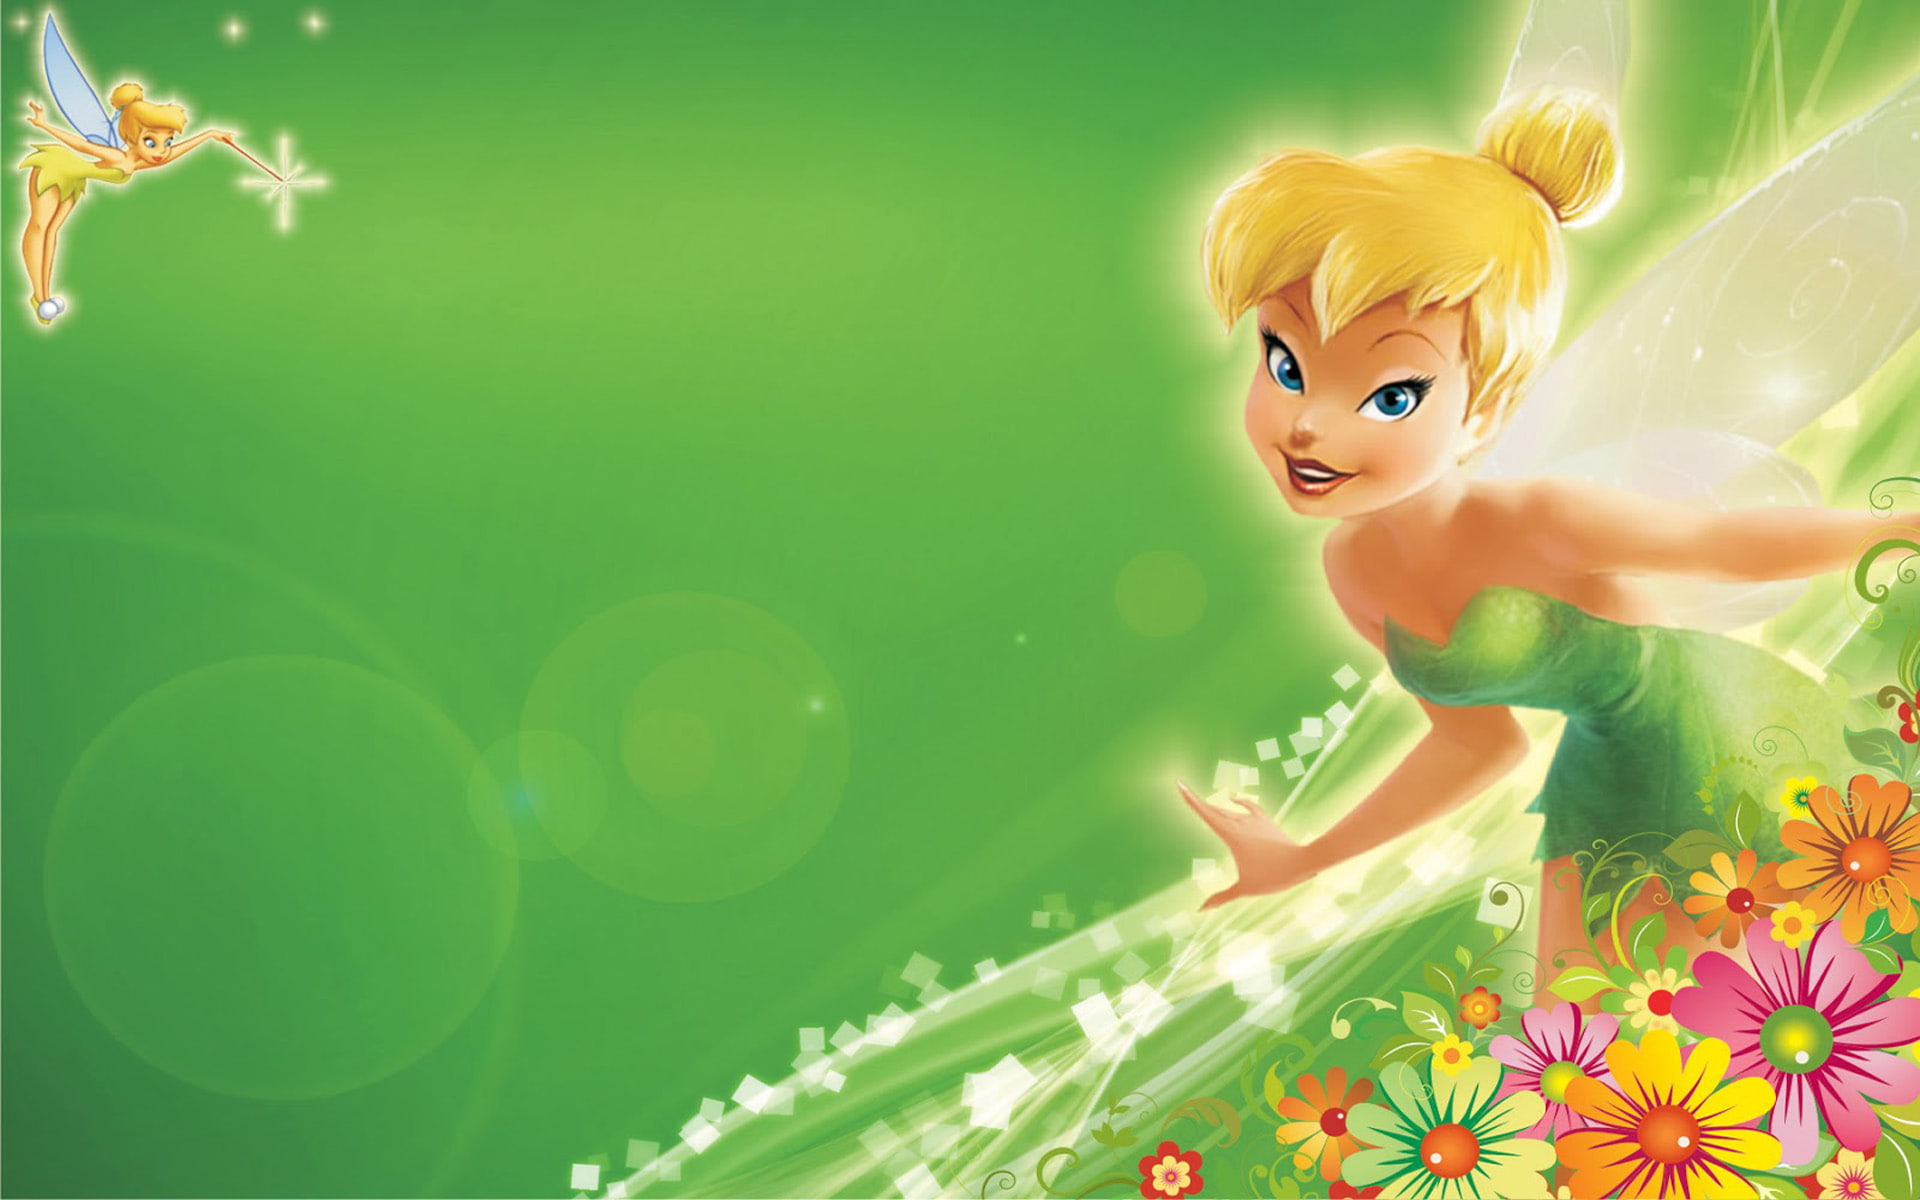 Tinkerbell Green Hd Wallpapers With Flower Decoration For Mobile Phones Tablet And Pc 1920×1200